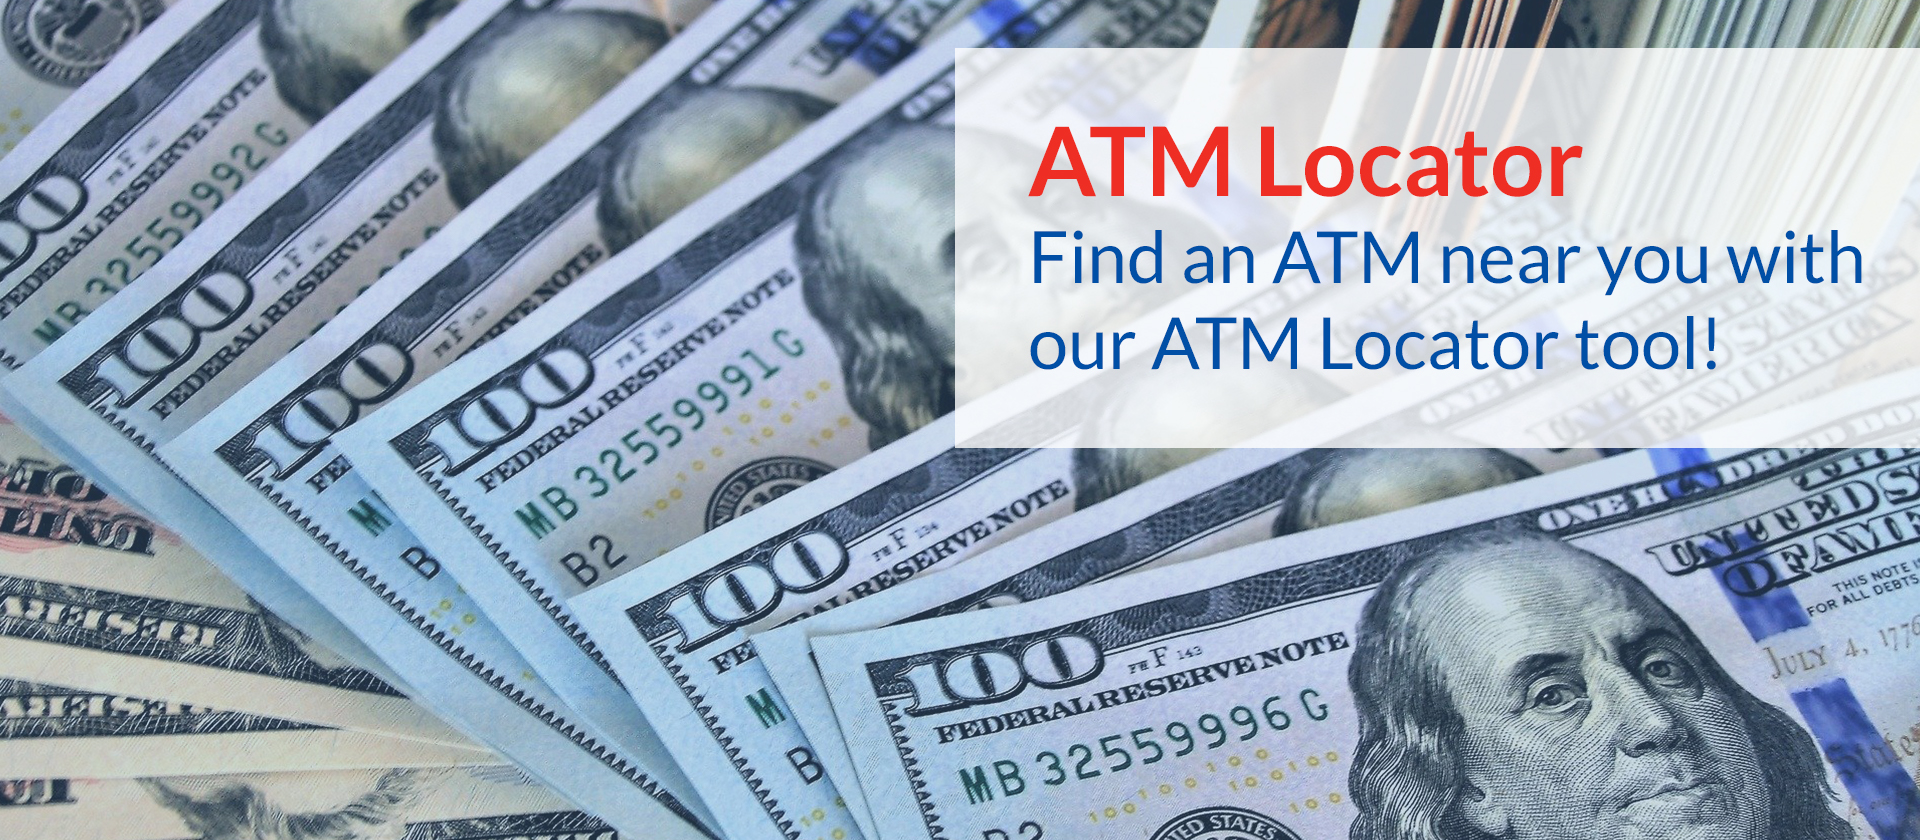 Find an ATM near you with our ATM Locator tool!